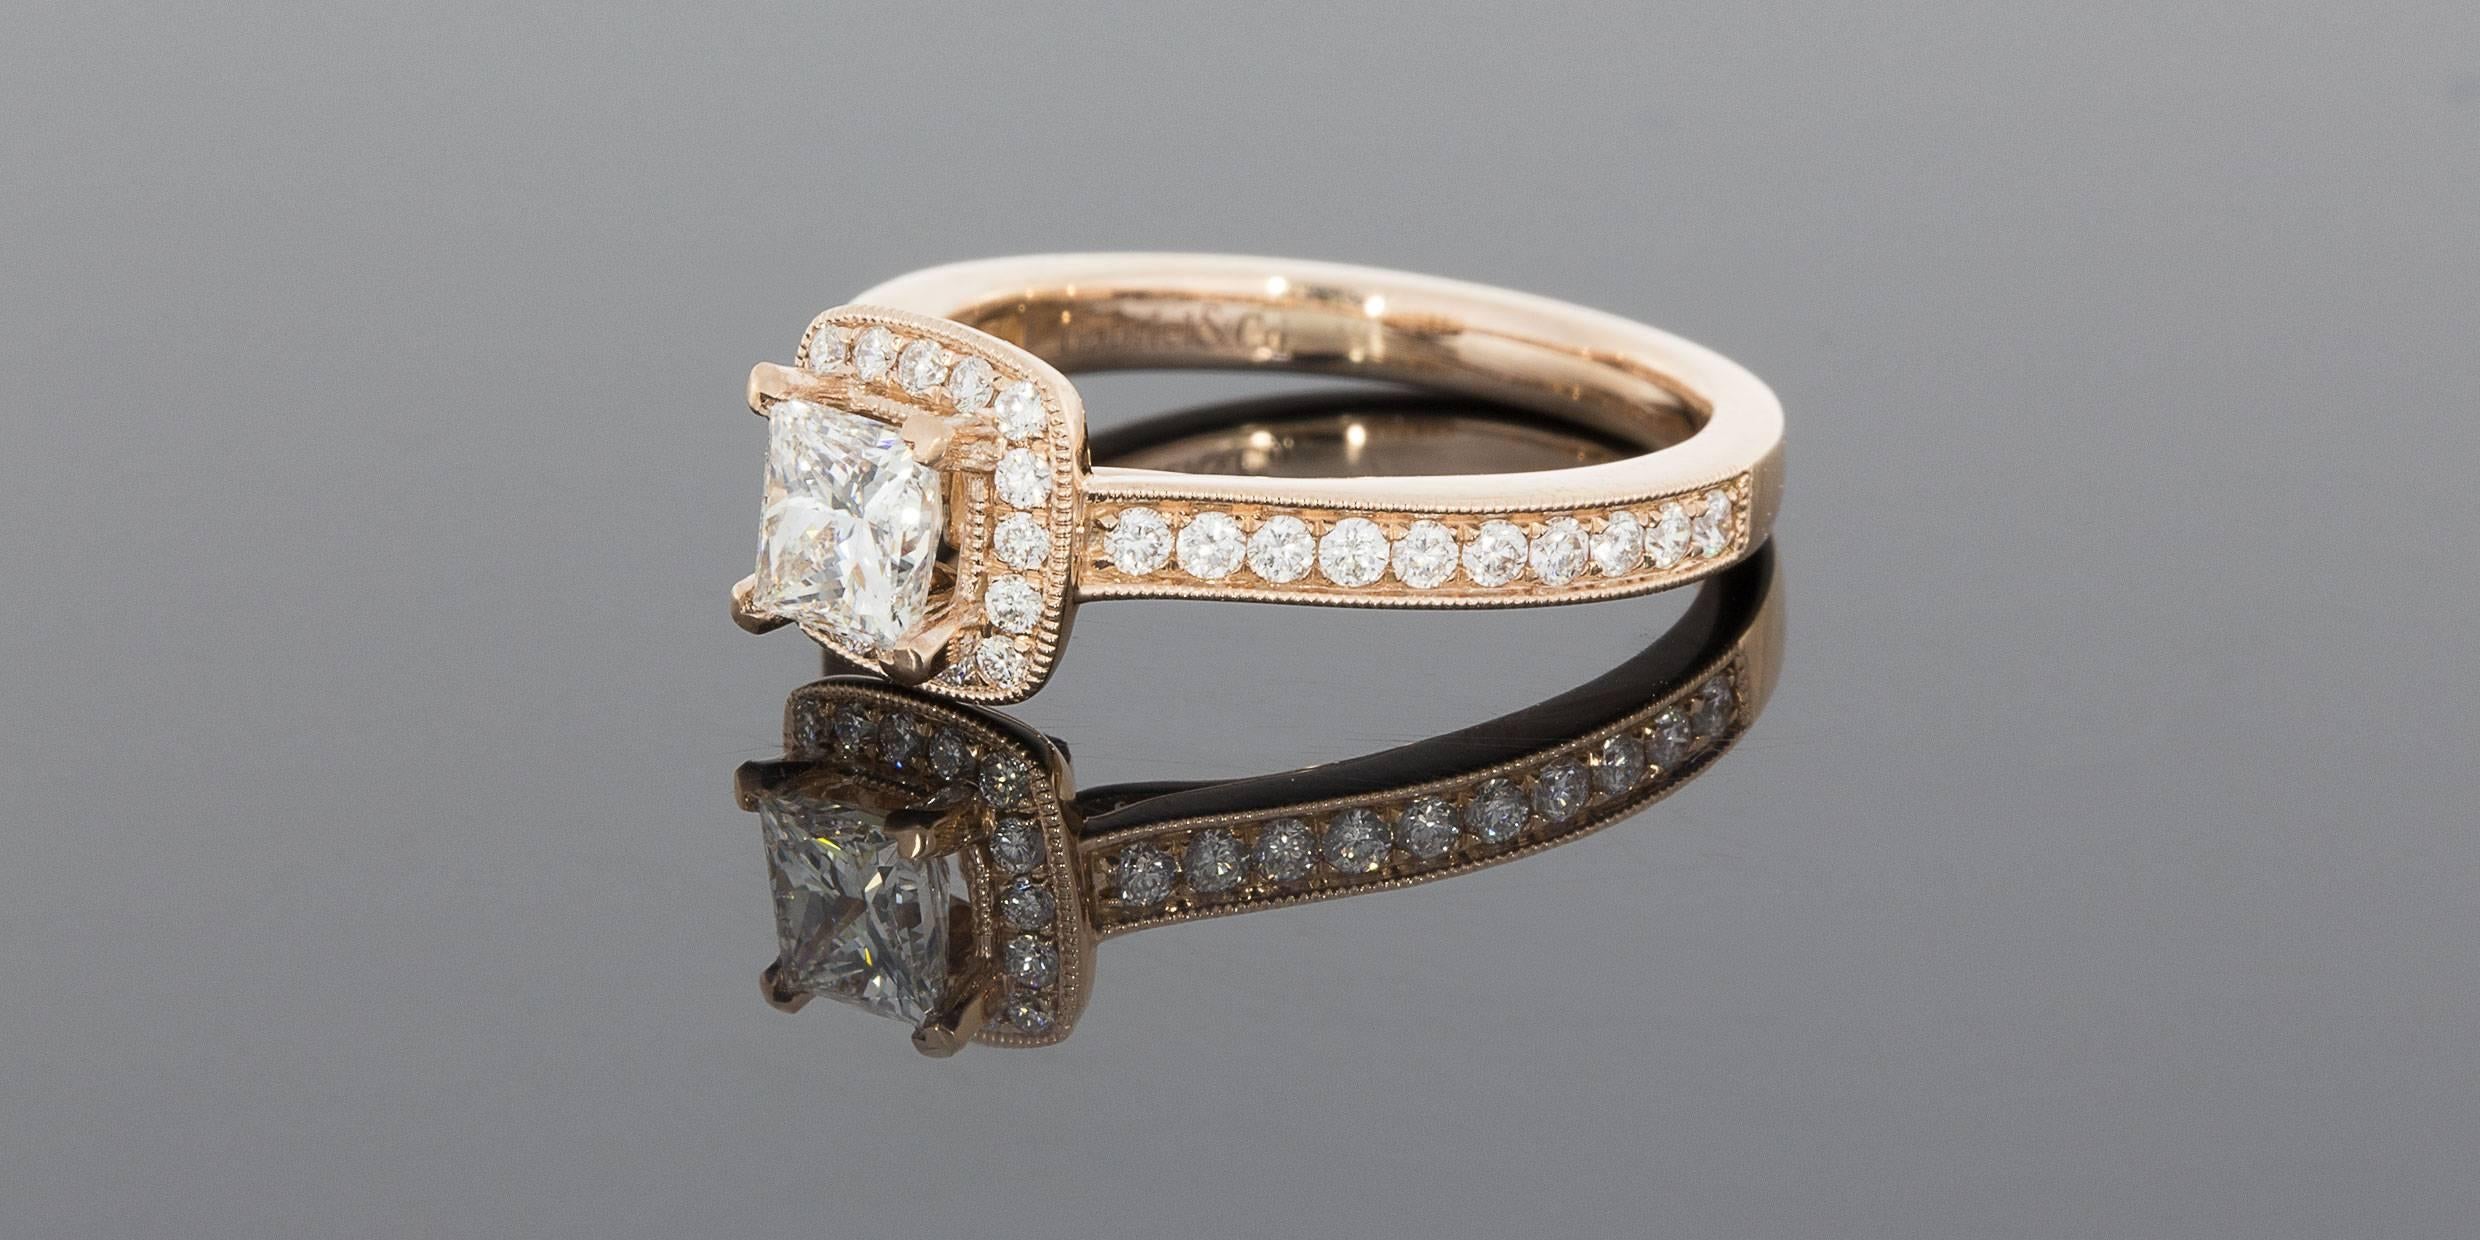 This absolutely stunning halo engagement ring is from the designer Gabriel & Co. It is a part of their Victorian Collection & features 1.0 carat total weight in sparkly, brilliant, high quality diamonds. The center diamond is a 0.60 carat